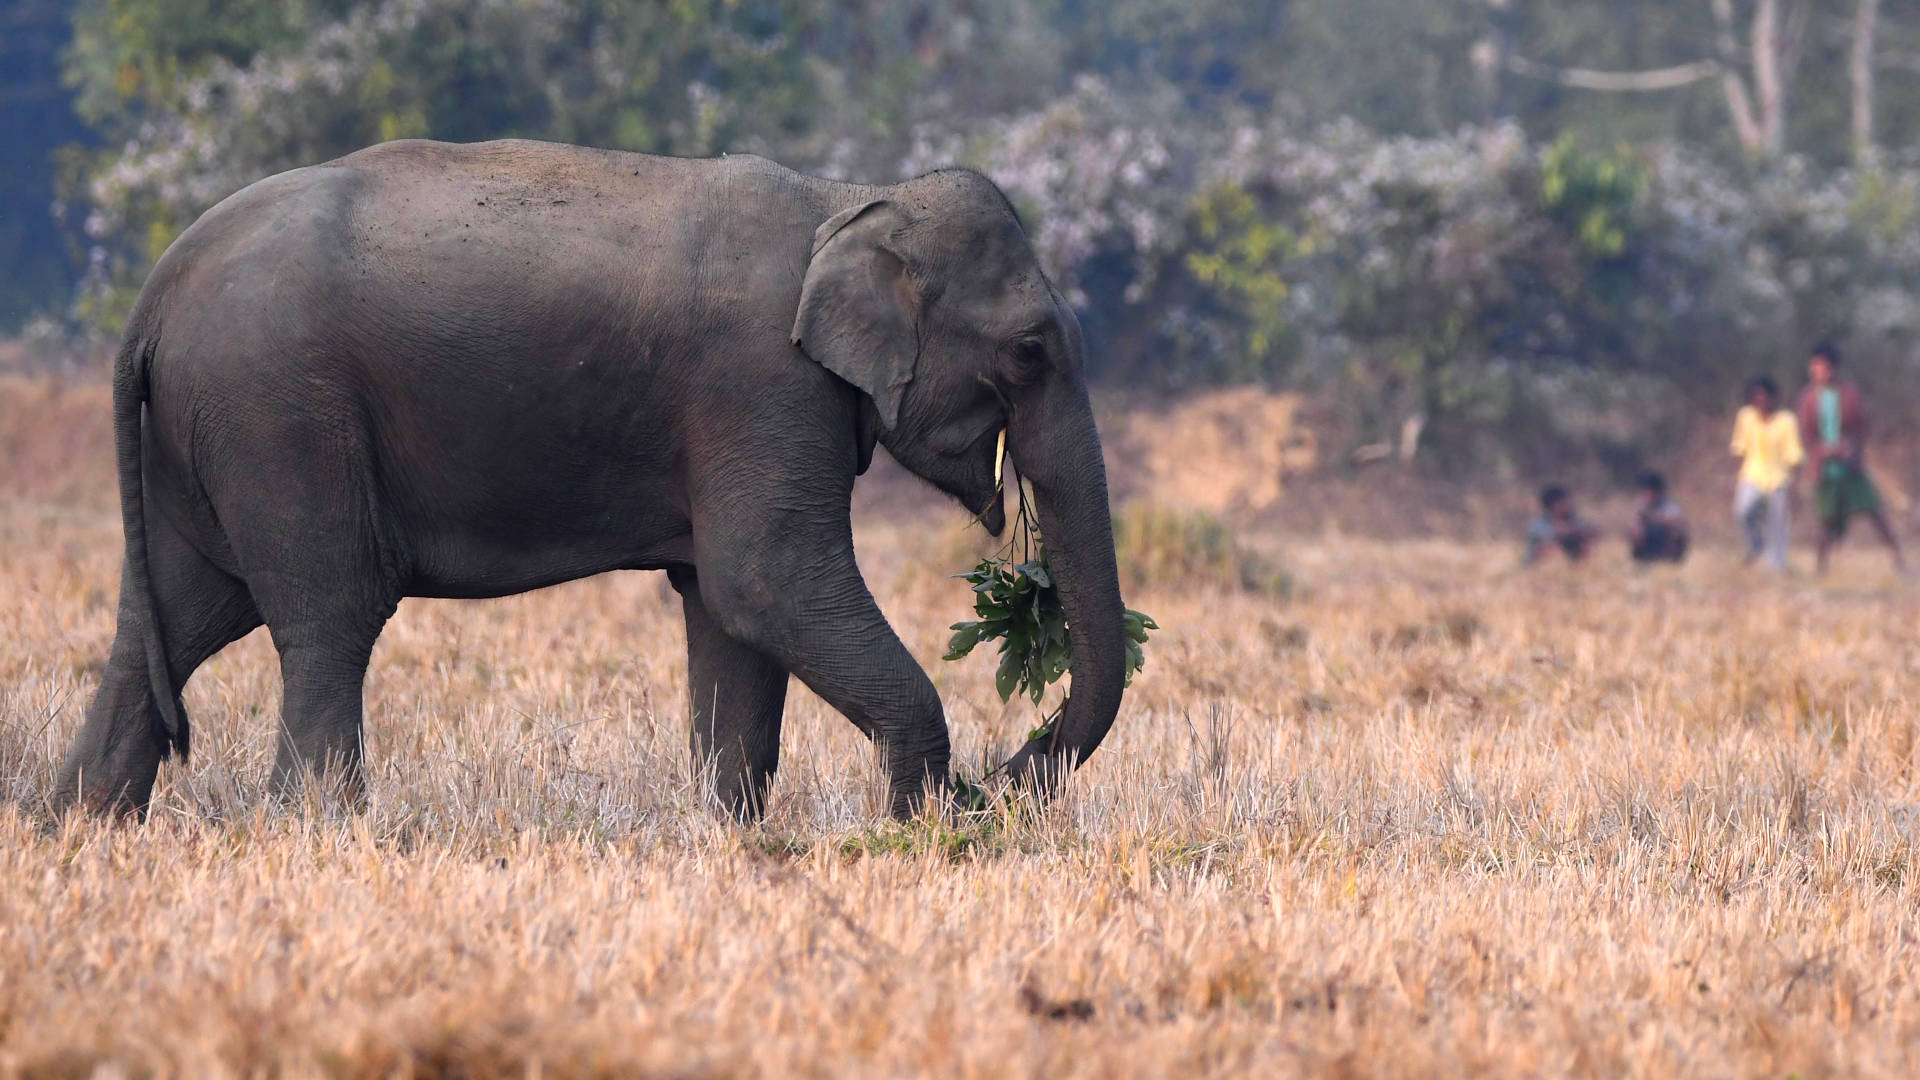 A wild elephant searches for food near a village in Nagaon district, in the northeastern state of Assam, India, in 2022.